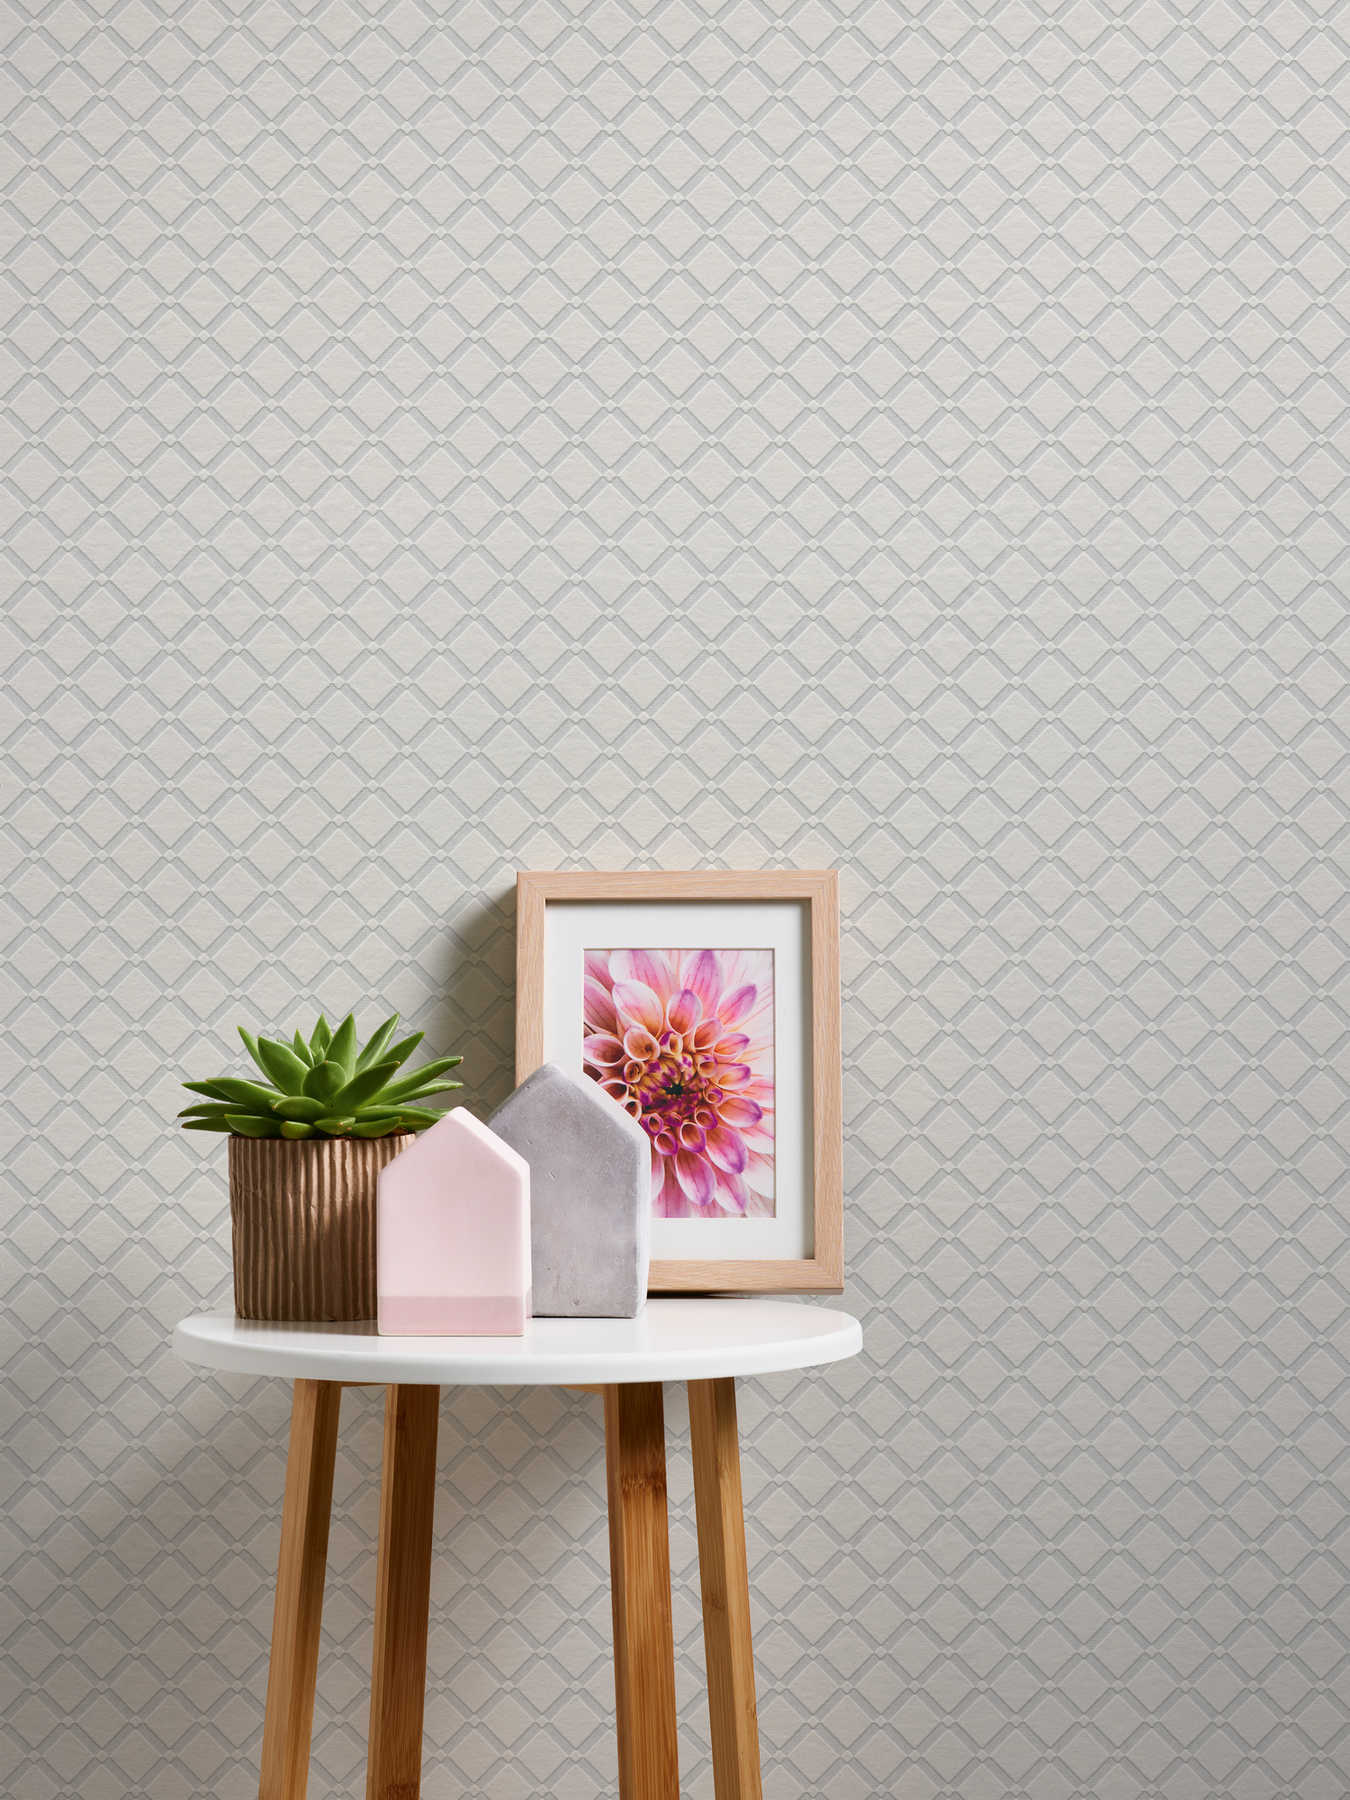             Paintable non-woven wallpaper with 3D diamond pattern
        